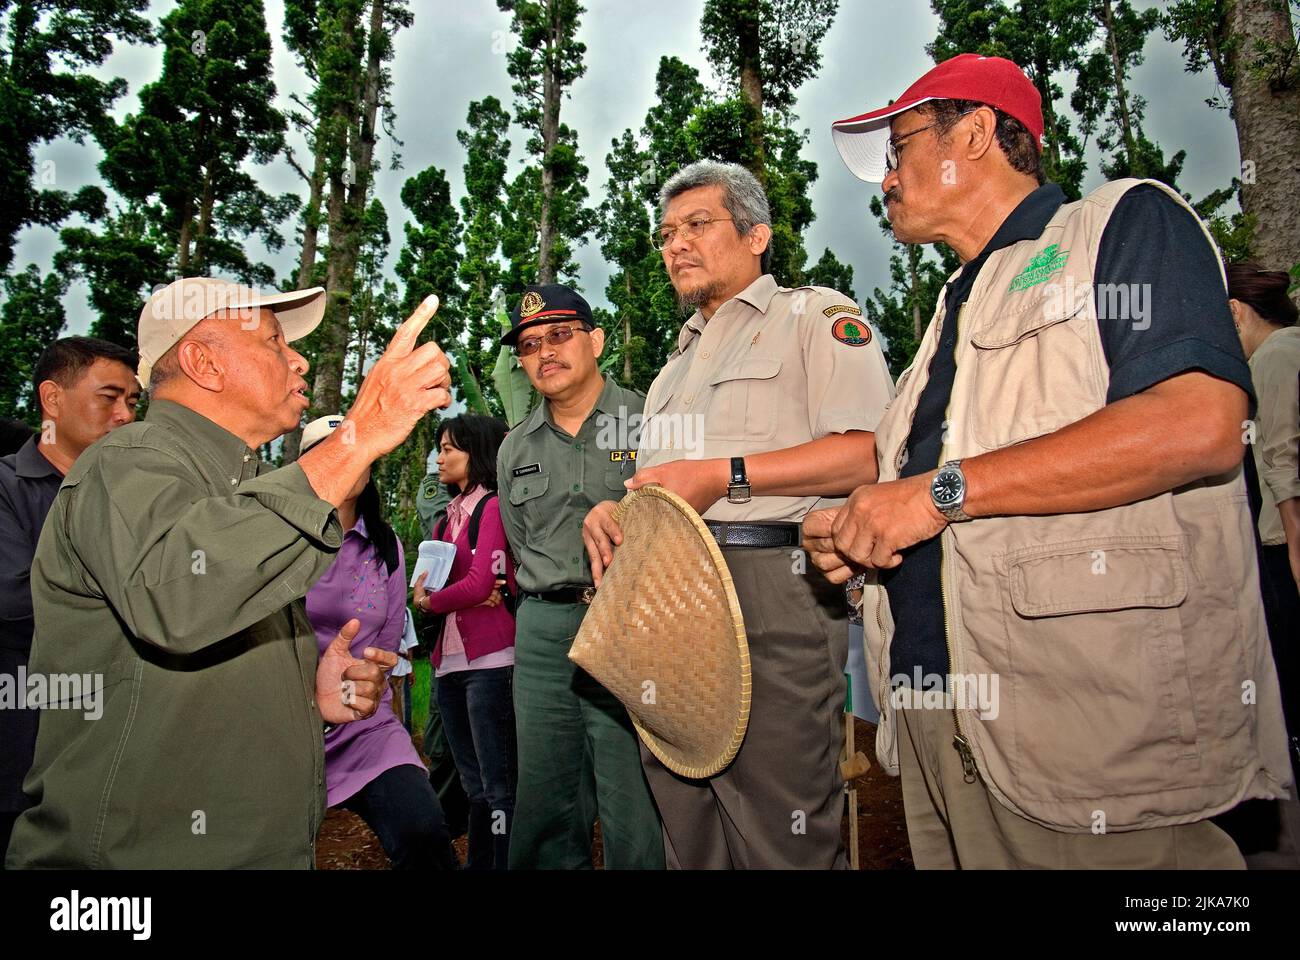 Conservation International-Indonesia director Jatna Supriatna, founder of Medco Energi International Arifin Panigoro and Indonesian Minister of Forestry MS Kaban (left to right) are having a conversation during an event organized by Conservation International (CI)-Indonesia and Gede Pangrango National Park in Nagrak, a village that lies on the border of the national park in Sukabumi, West Java, Indonesia. Stock Photo